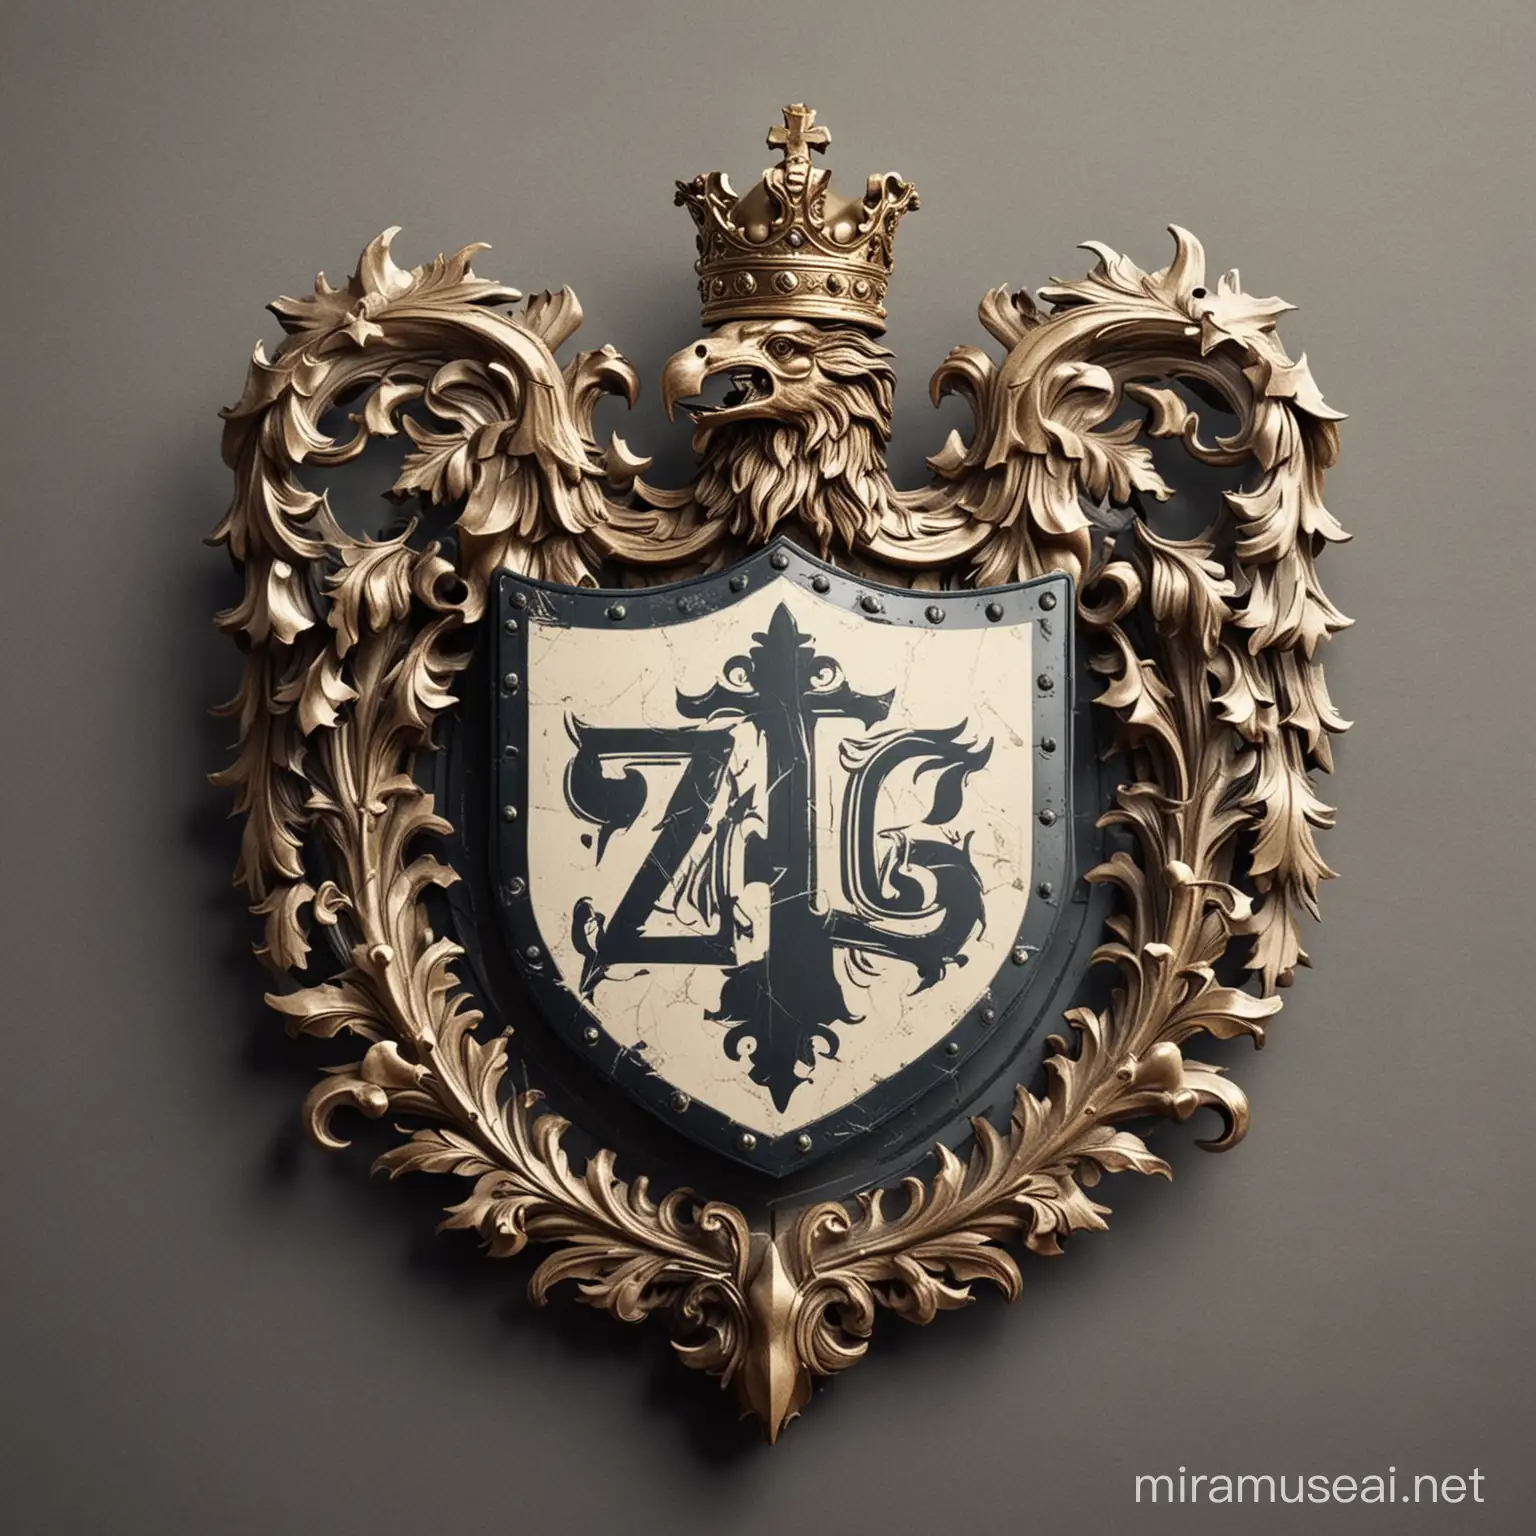 Need a logo designed for my company that looks like a family crest / like a cool coat of arms.. but for my company. Zing International . It should look regal 